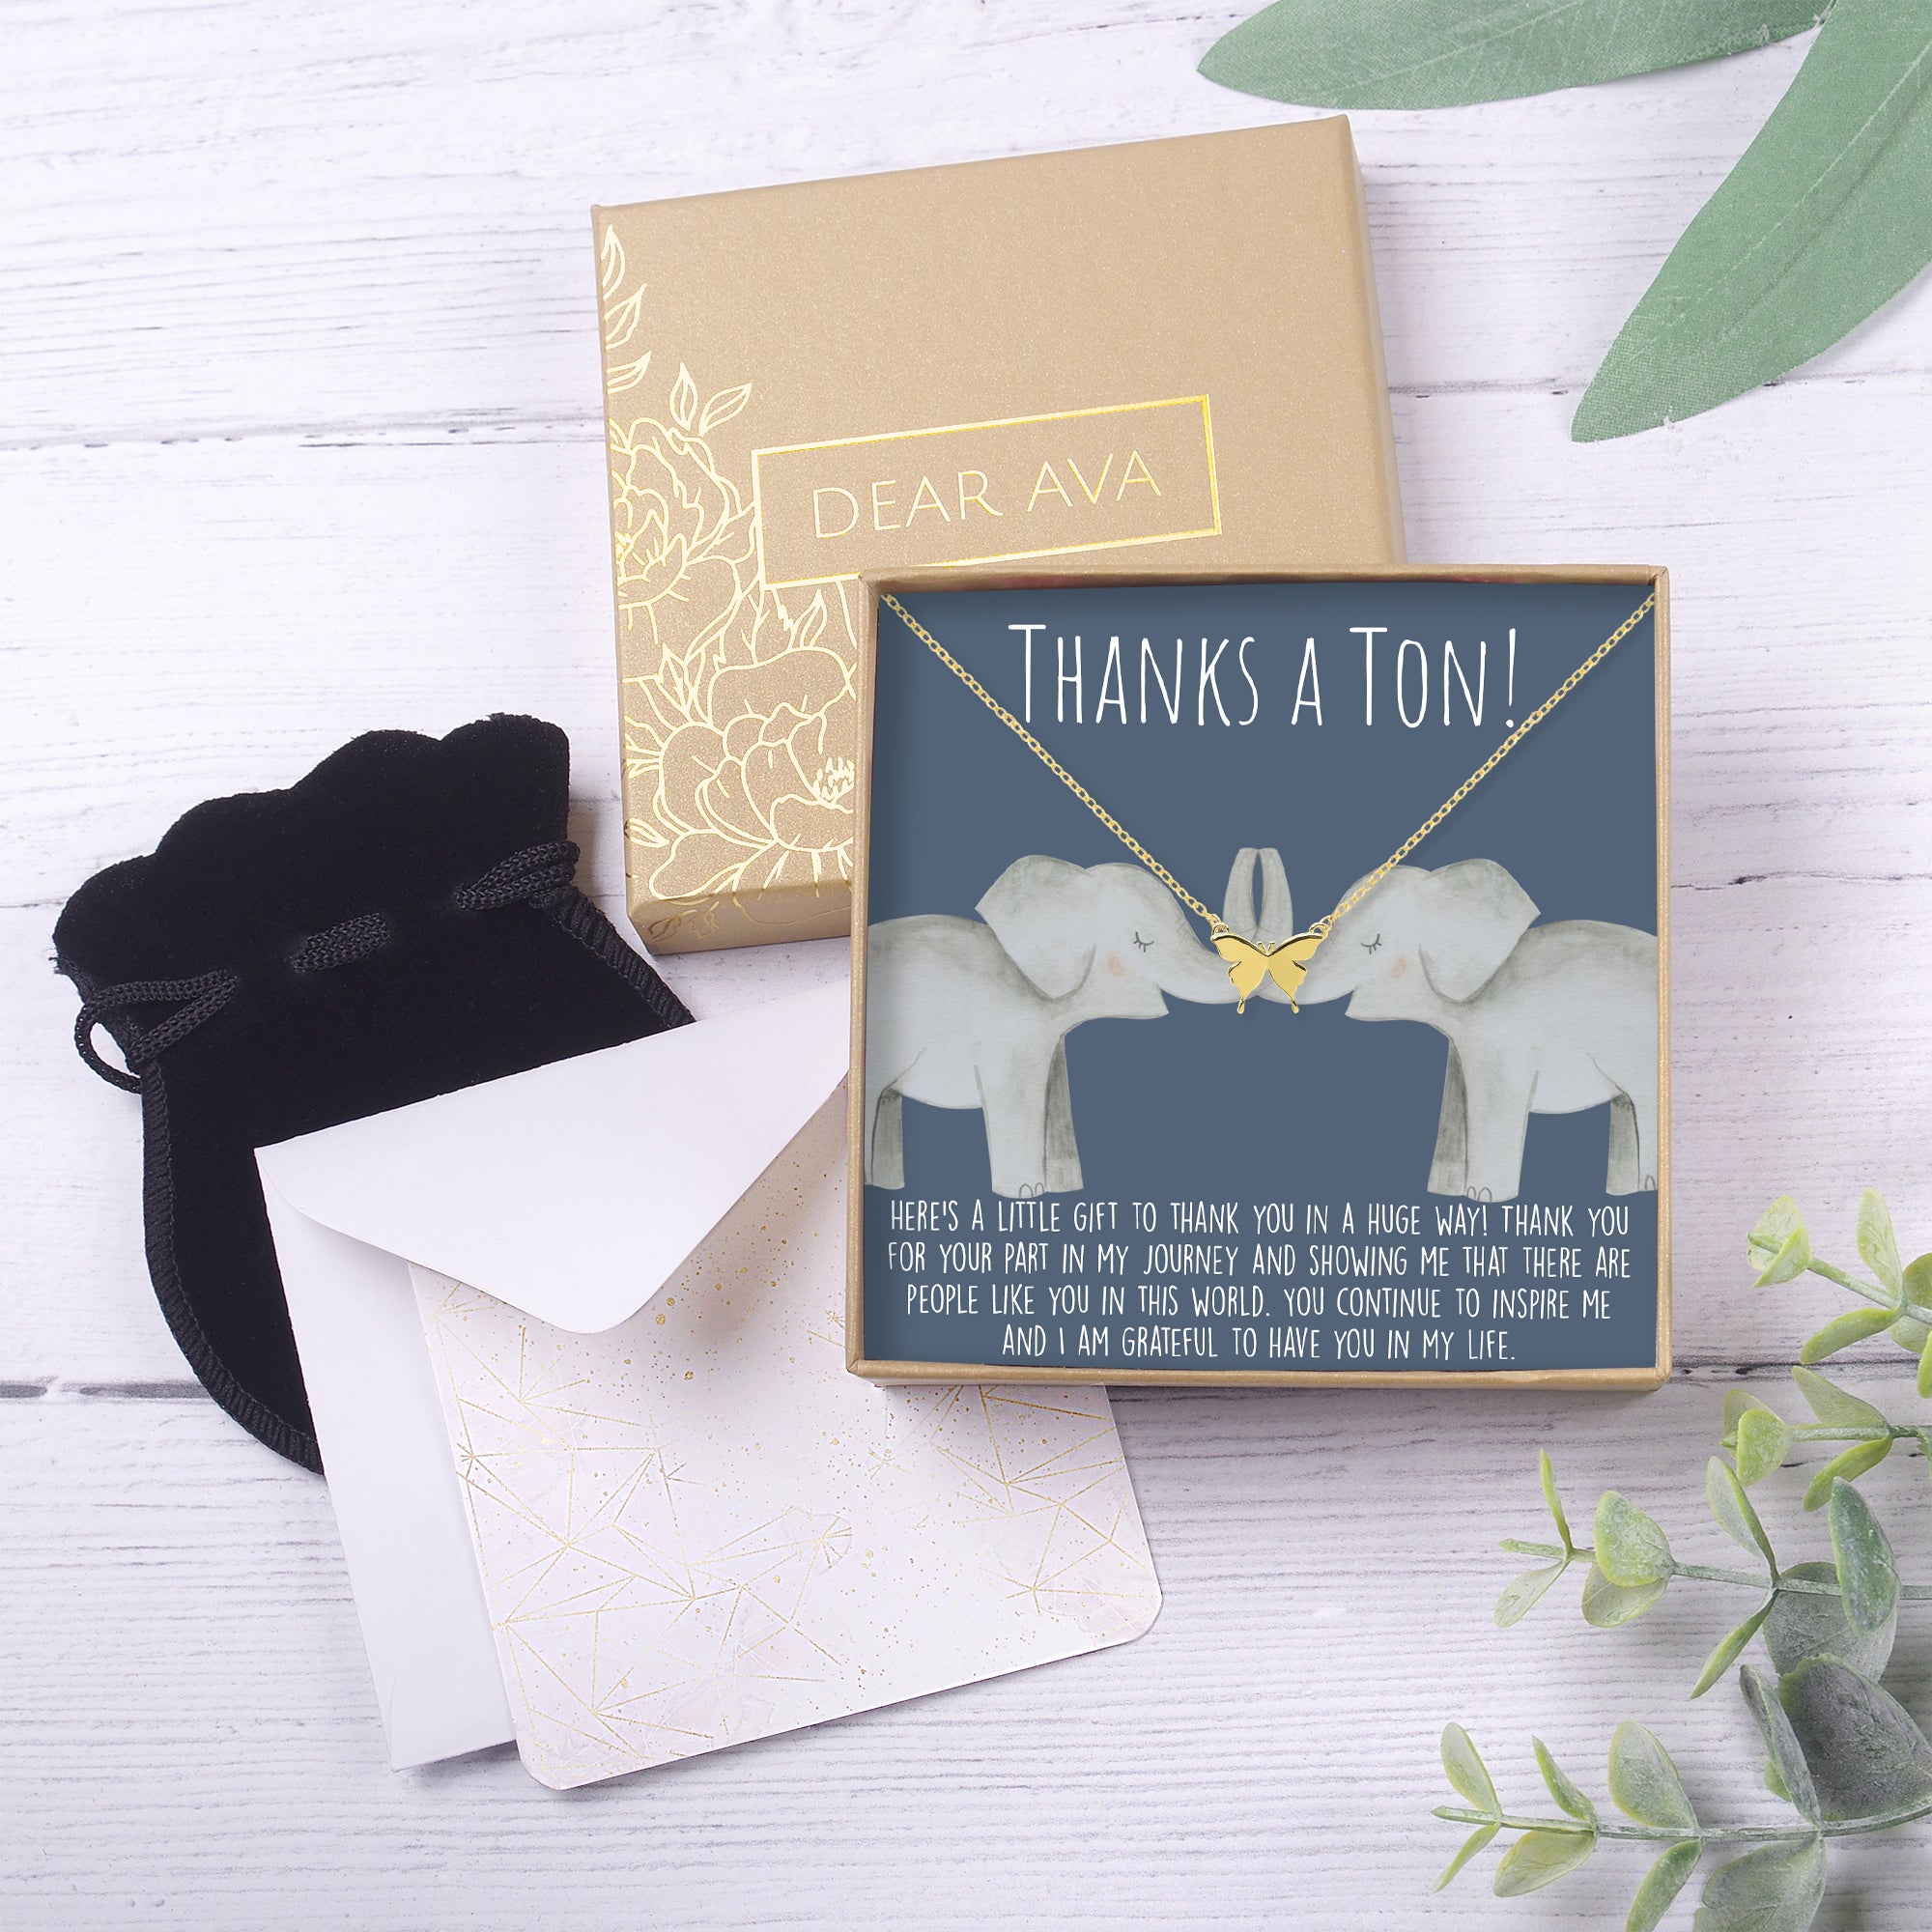 Thank You Card Jewelry Gift Set, Appreciation Gift for Her, Thank You Gift for Friends, Christmas Jewery Gift for Her, Necklace and Card Gift Set